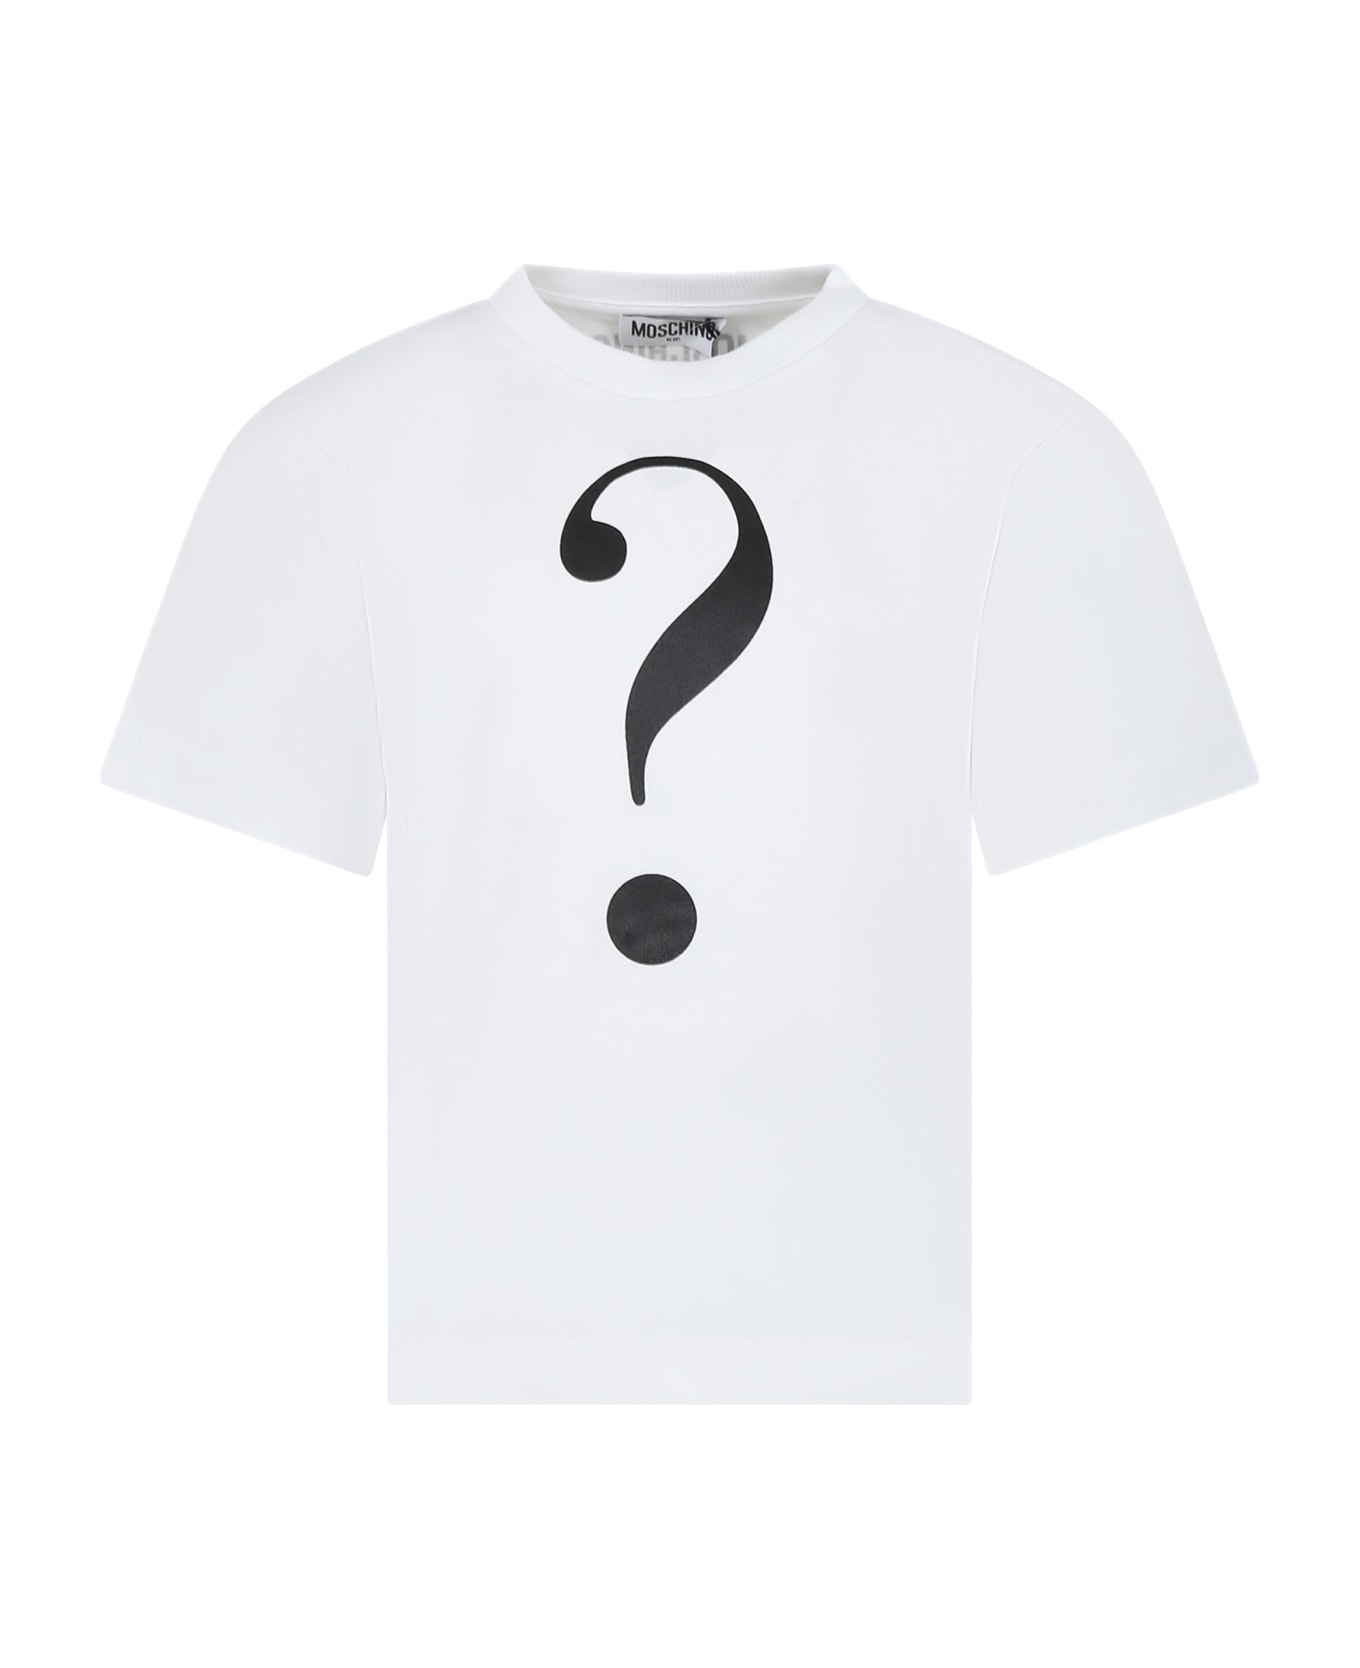 Moschino White T-shirt For Kids With Question Mark - White